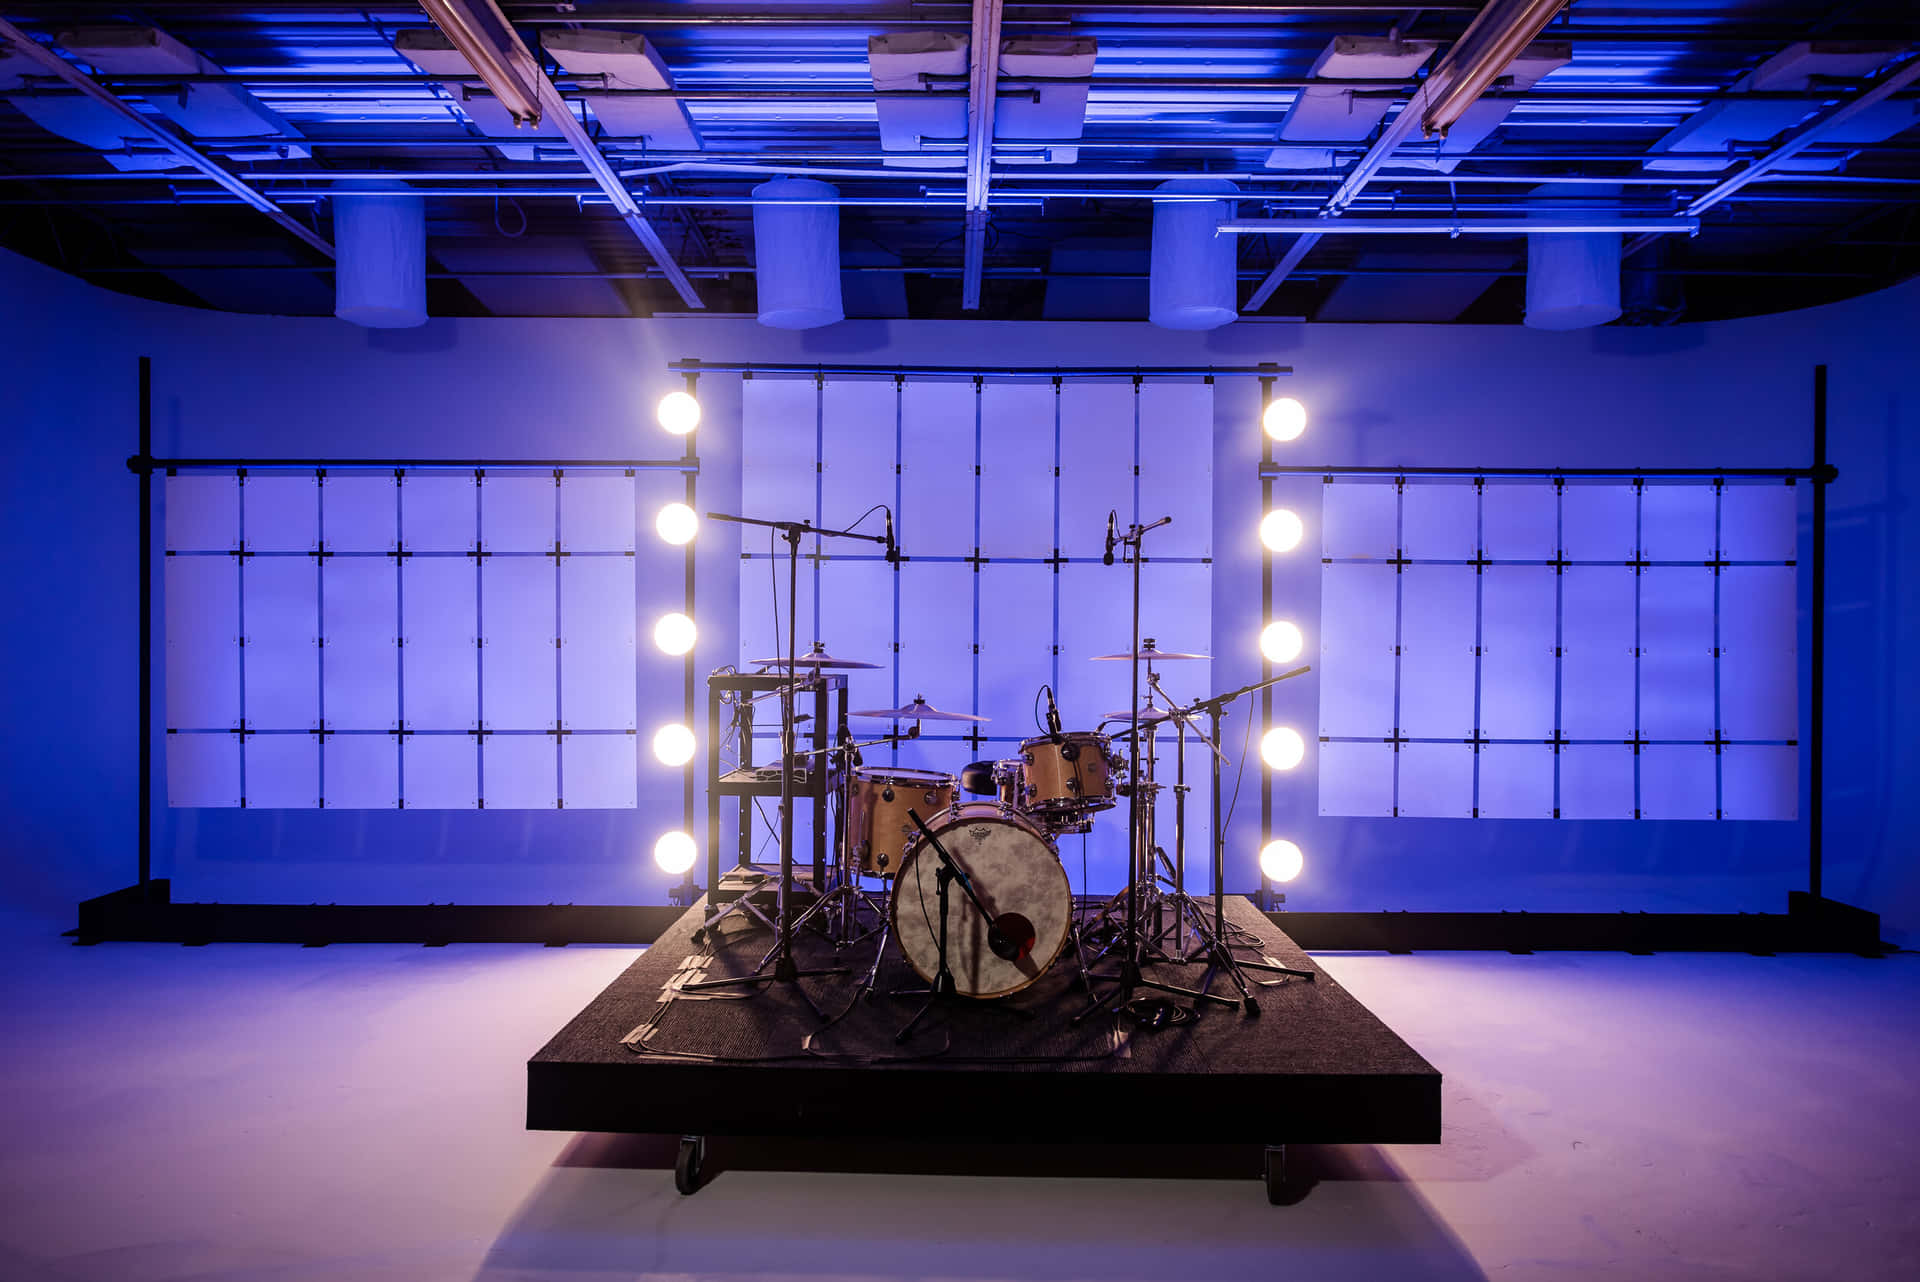 A Drum Set Is On A Stage With Blue Lights